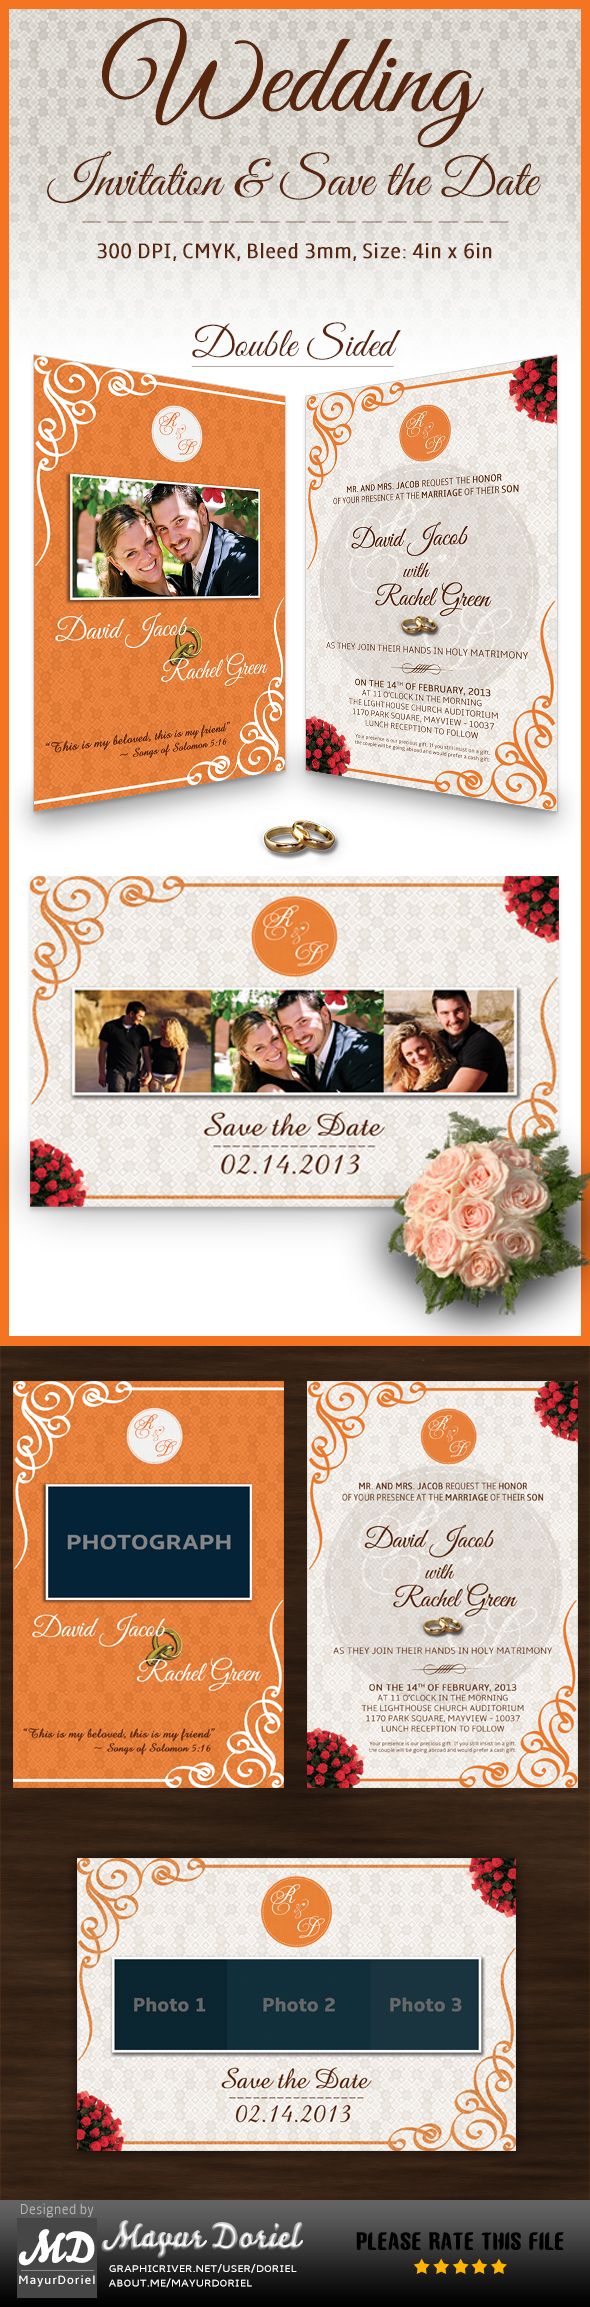 wedding invite card save date marriage orange graphicriver i do elegant Events sale template Love rings